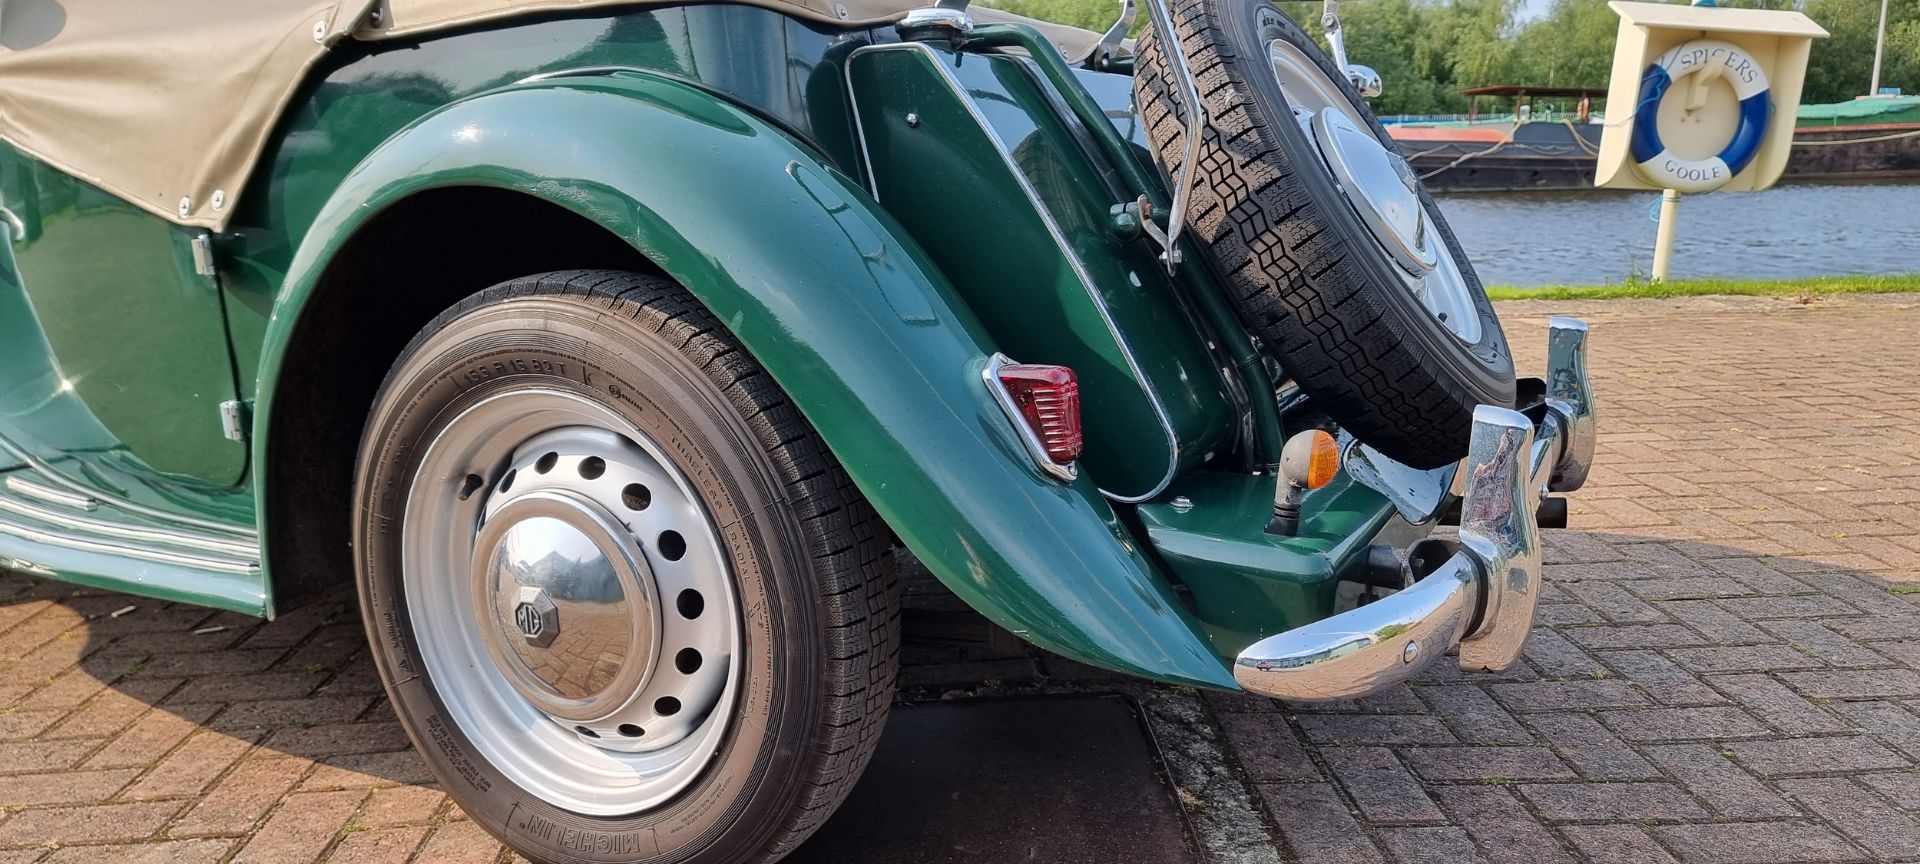 1951 MG TD/C, Mk 2, 1250cc. Registration number KAS 395 (non transferrable). Chassis number TD/ - Image 6 of 20